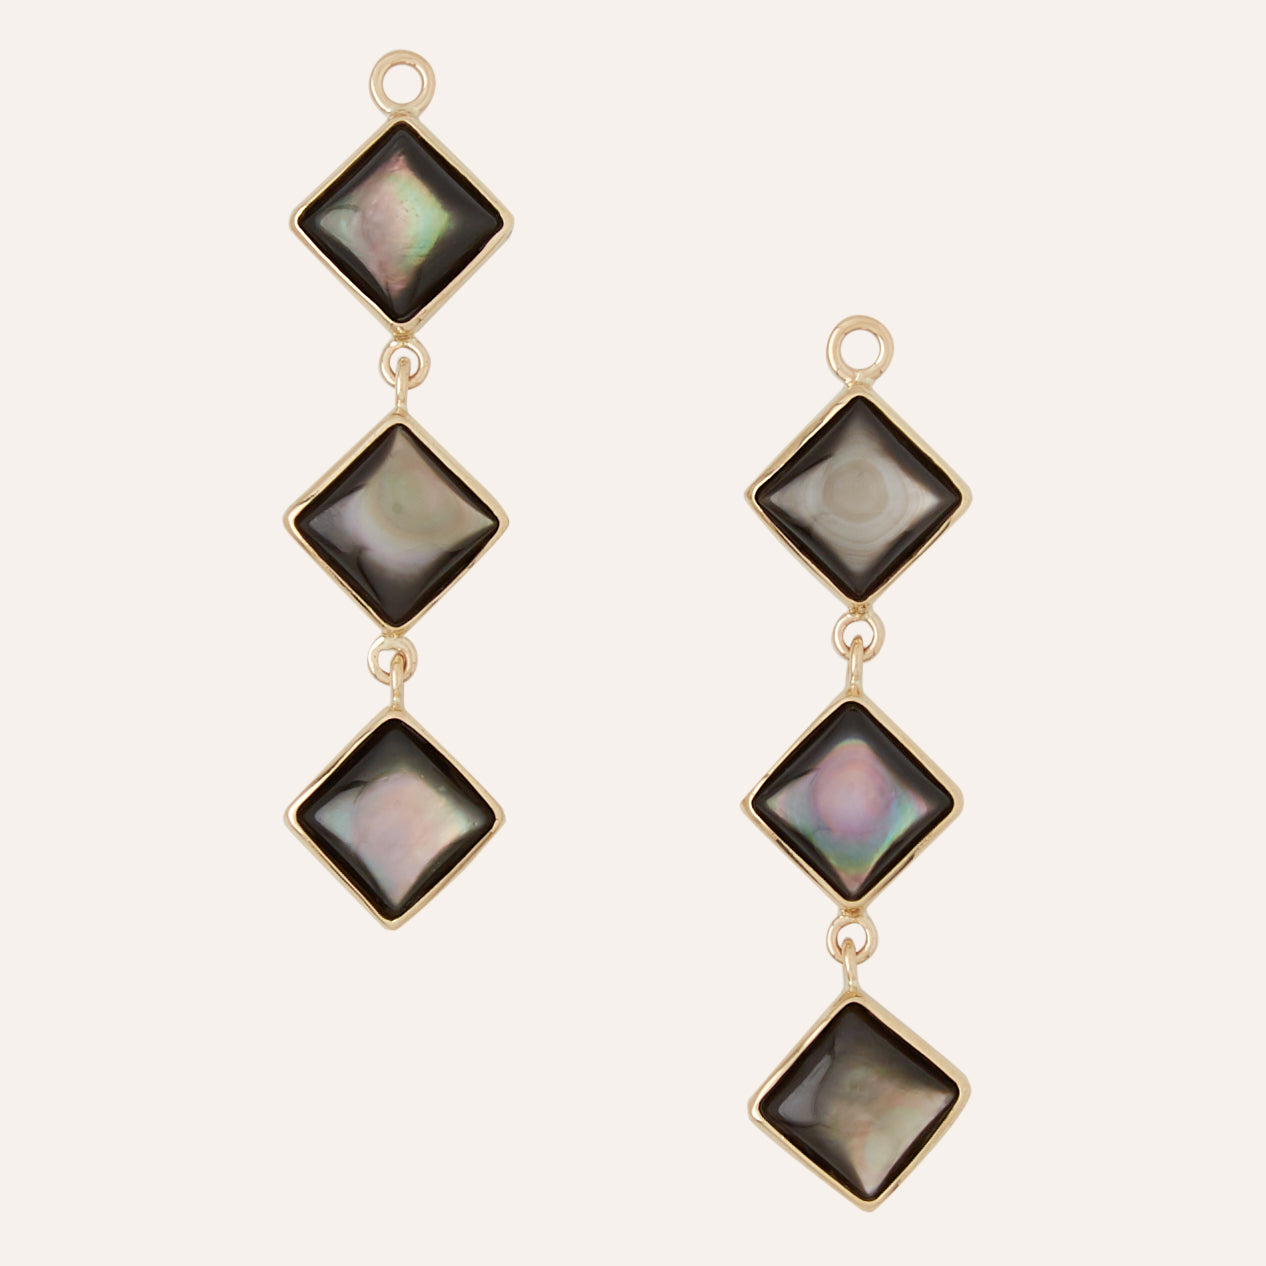 Black Mother of Pearl Square Cabochon 8mm Earring Drops